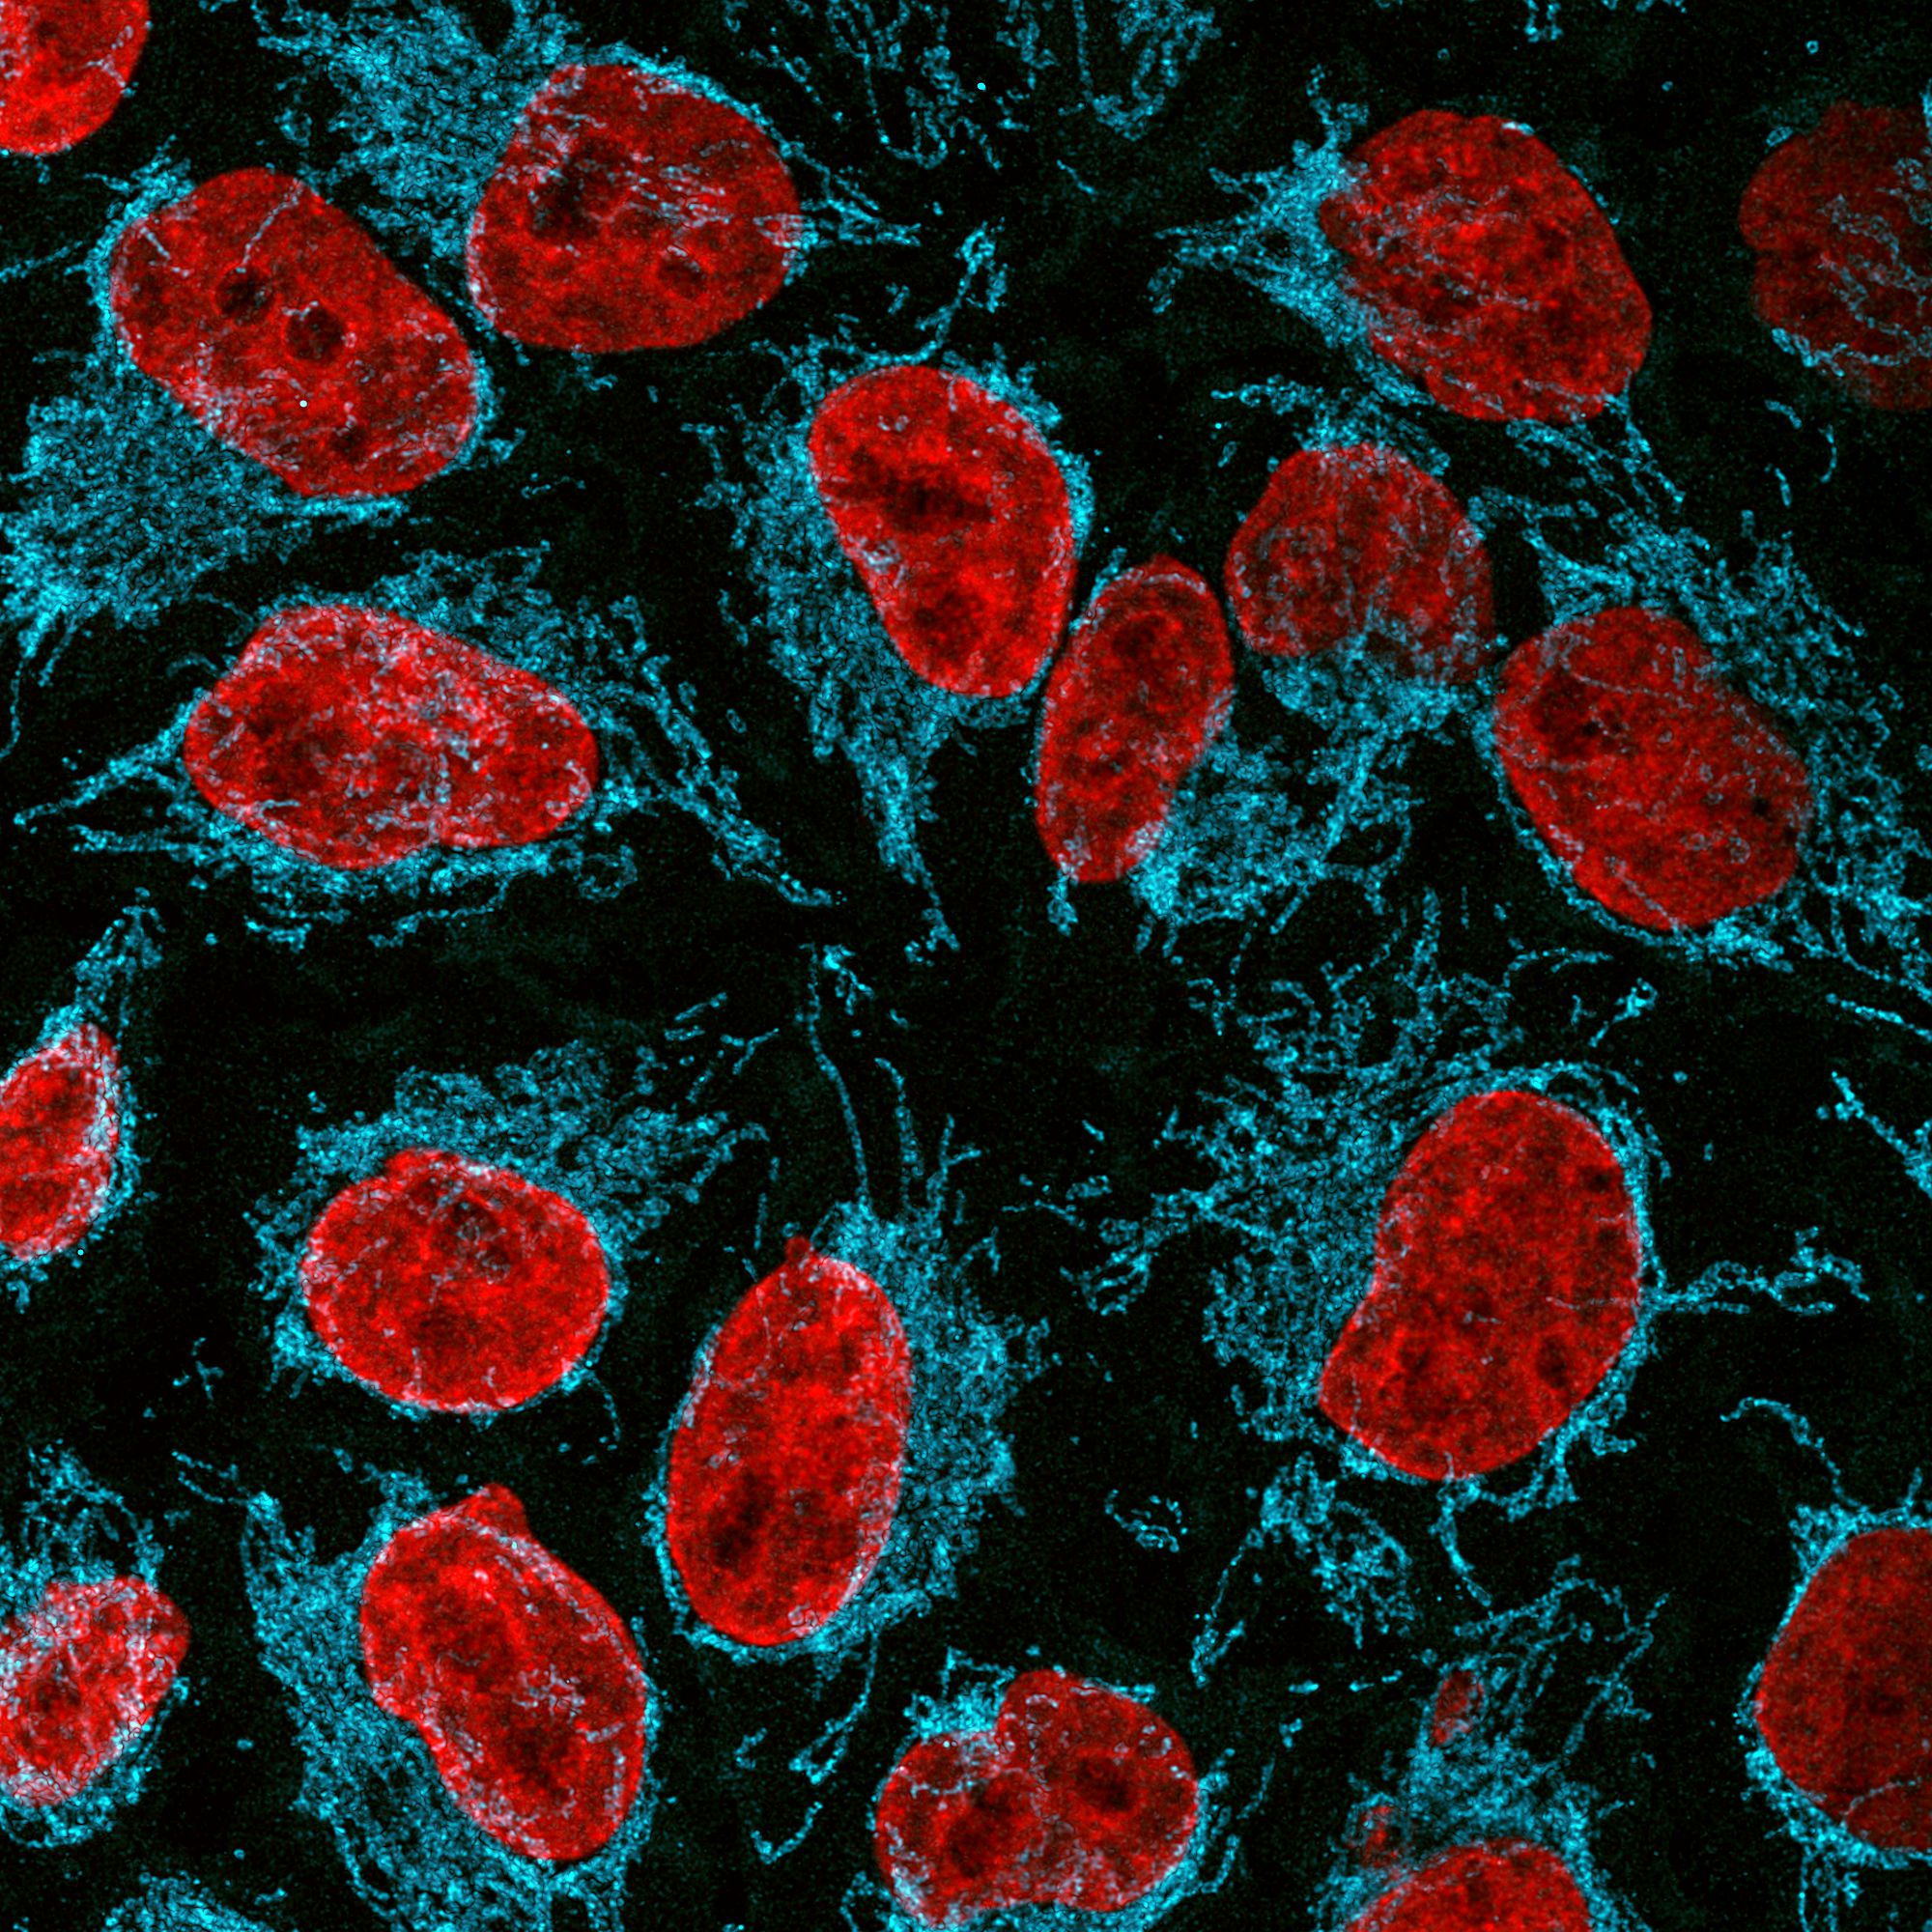 Immunofluorescence of HeLa: PFA-fixed HeLa cells were stained with anti-TOM70 (14528-1-AP) labeled with FlexAble CoraLite® Plus 405 Kit (KFA006, cyan). Cell nuclei are in red. Confocal images were acquired with a 100x oil objective and post-processed. Images were recorded at the Core Facility Bioimaging at the Biomedical Center, LMU Munich.